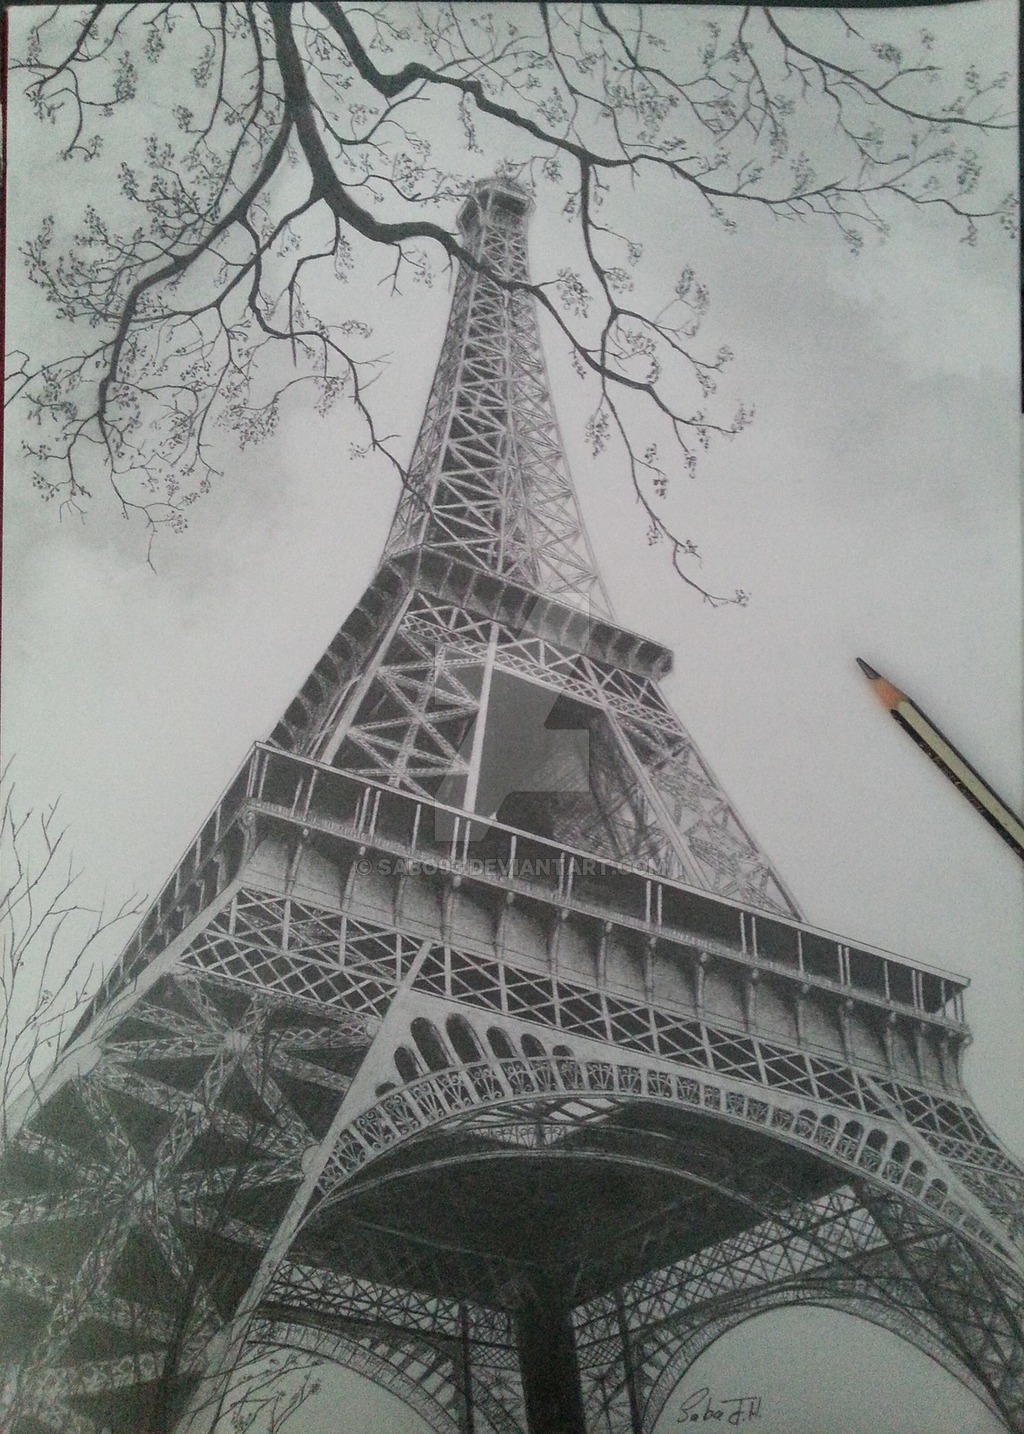 Eiffel Tower by Sabo93 on Clipart library